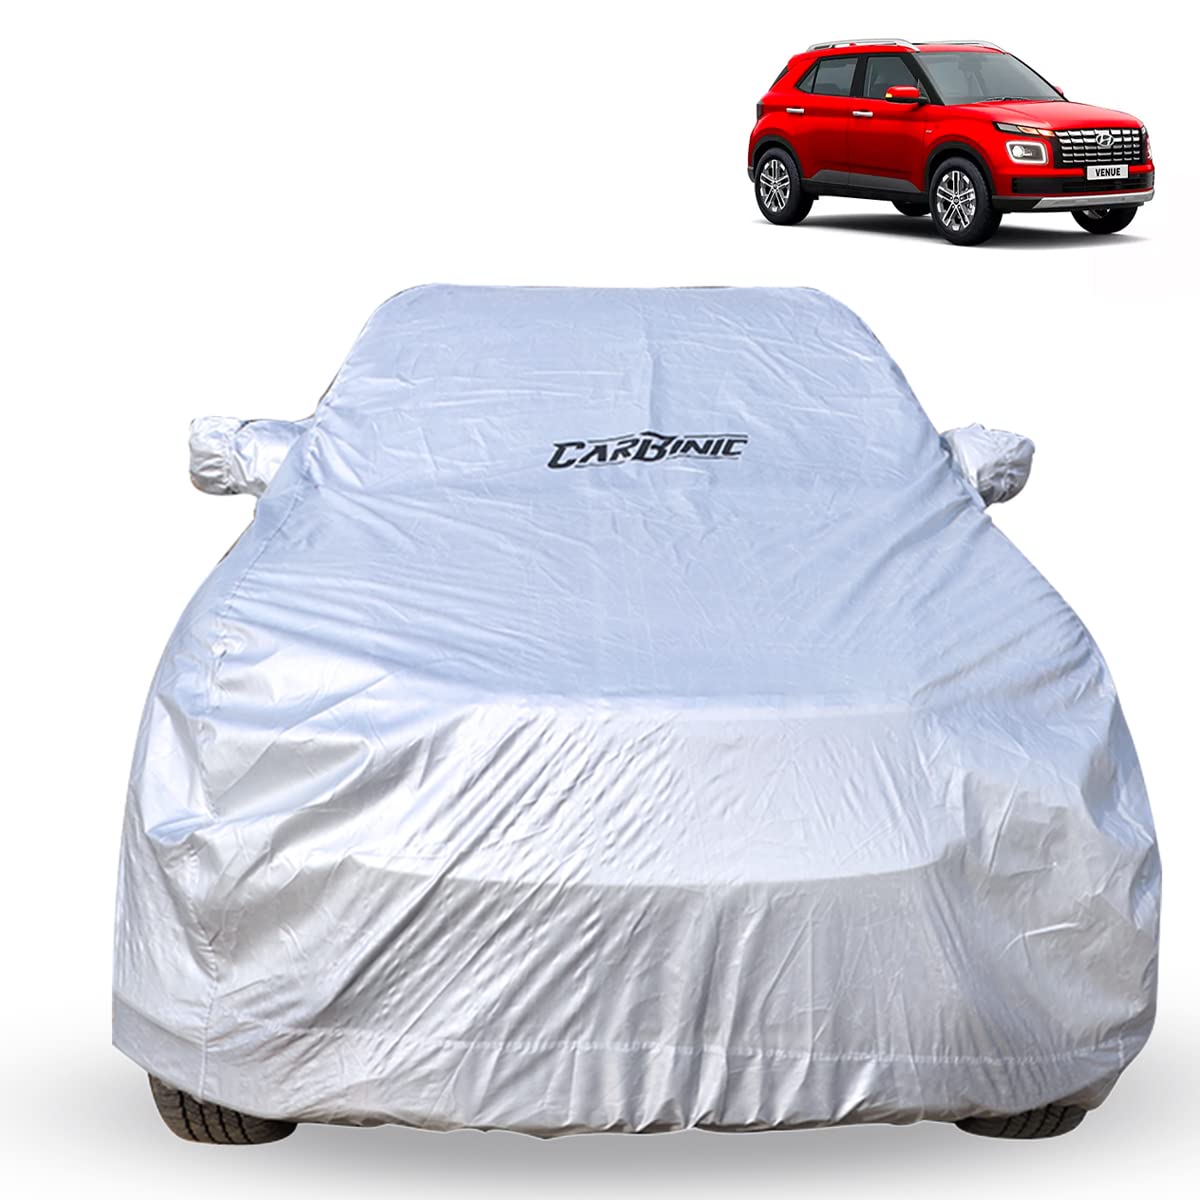 CarBinic Car Cover for Hyundai Venue 2019 Water Resistant (Tested) and Dustproof Custom Fit UV Heat Resistant Outdoor Protection with Triple Stitched Fully Elastic Surface | Silver with Pockets